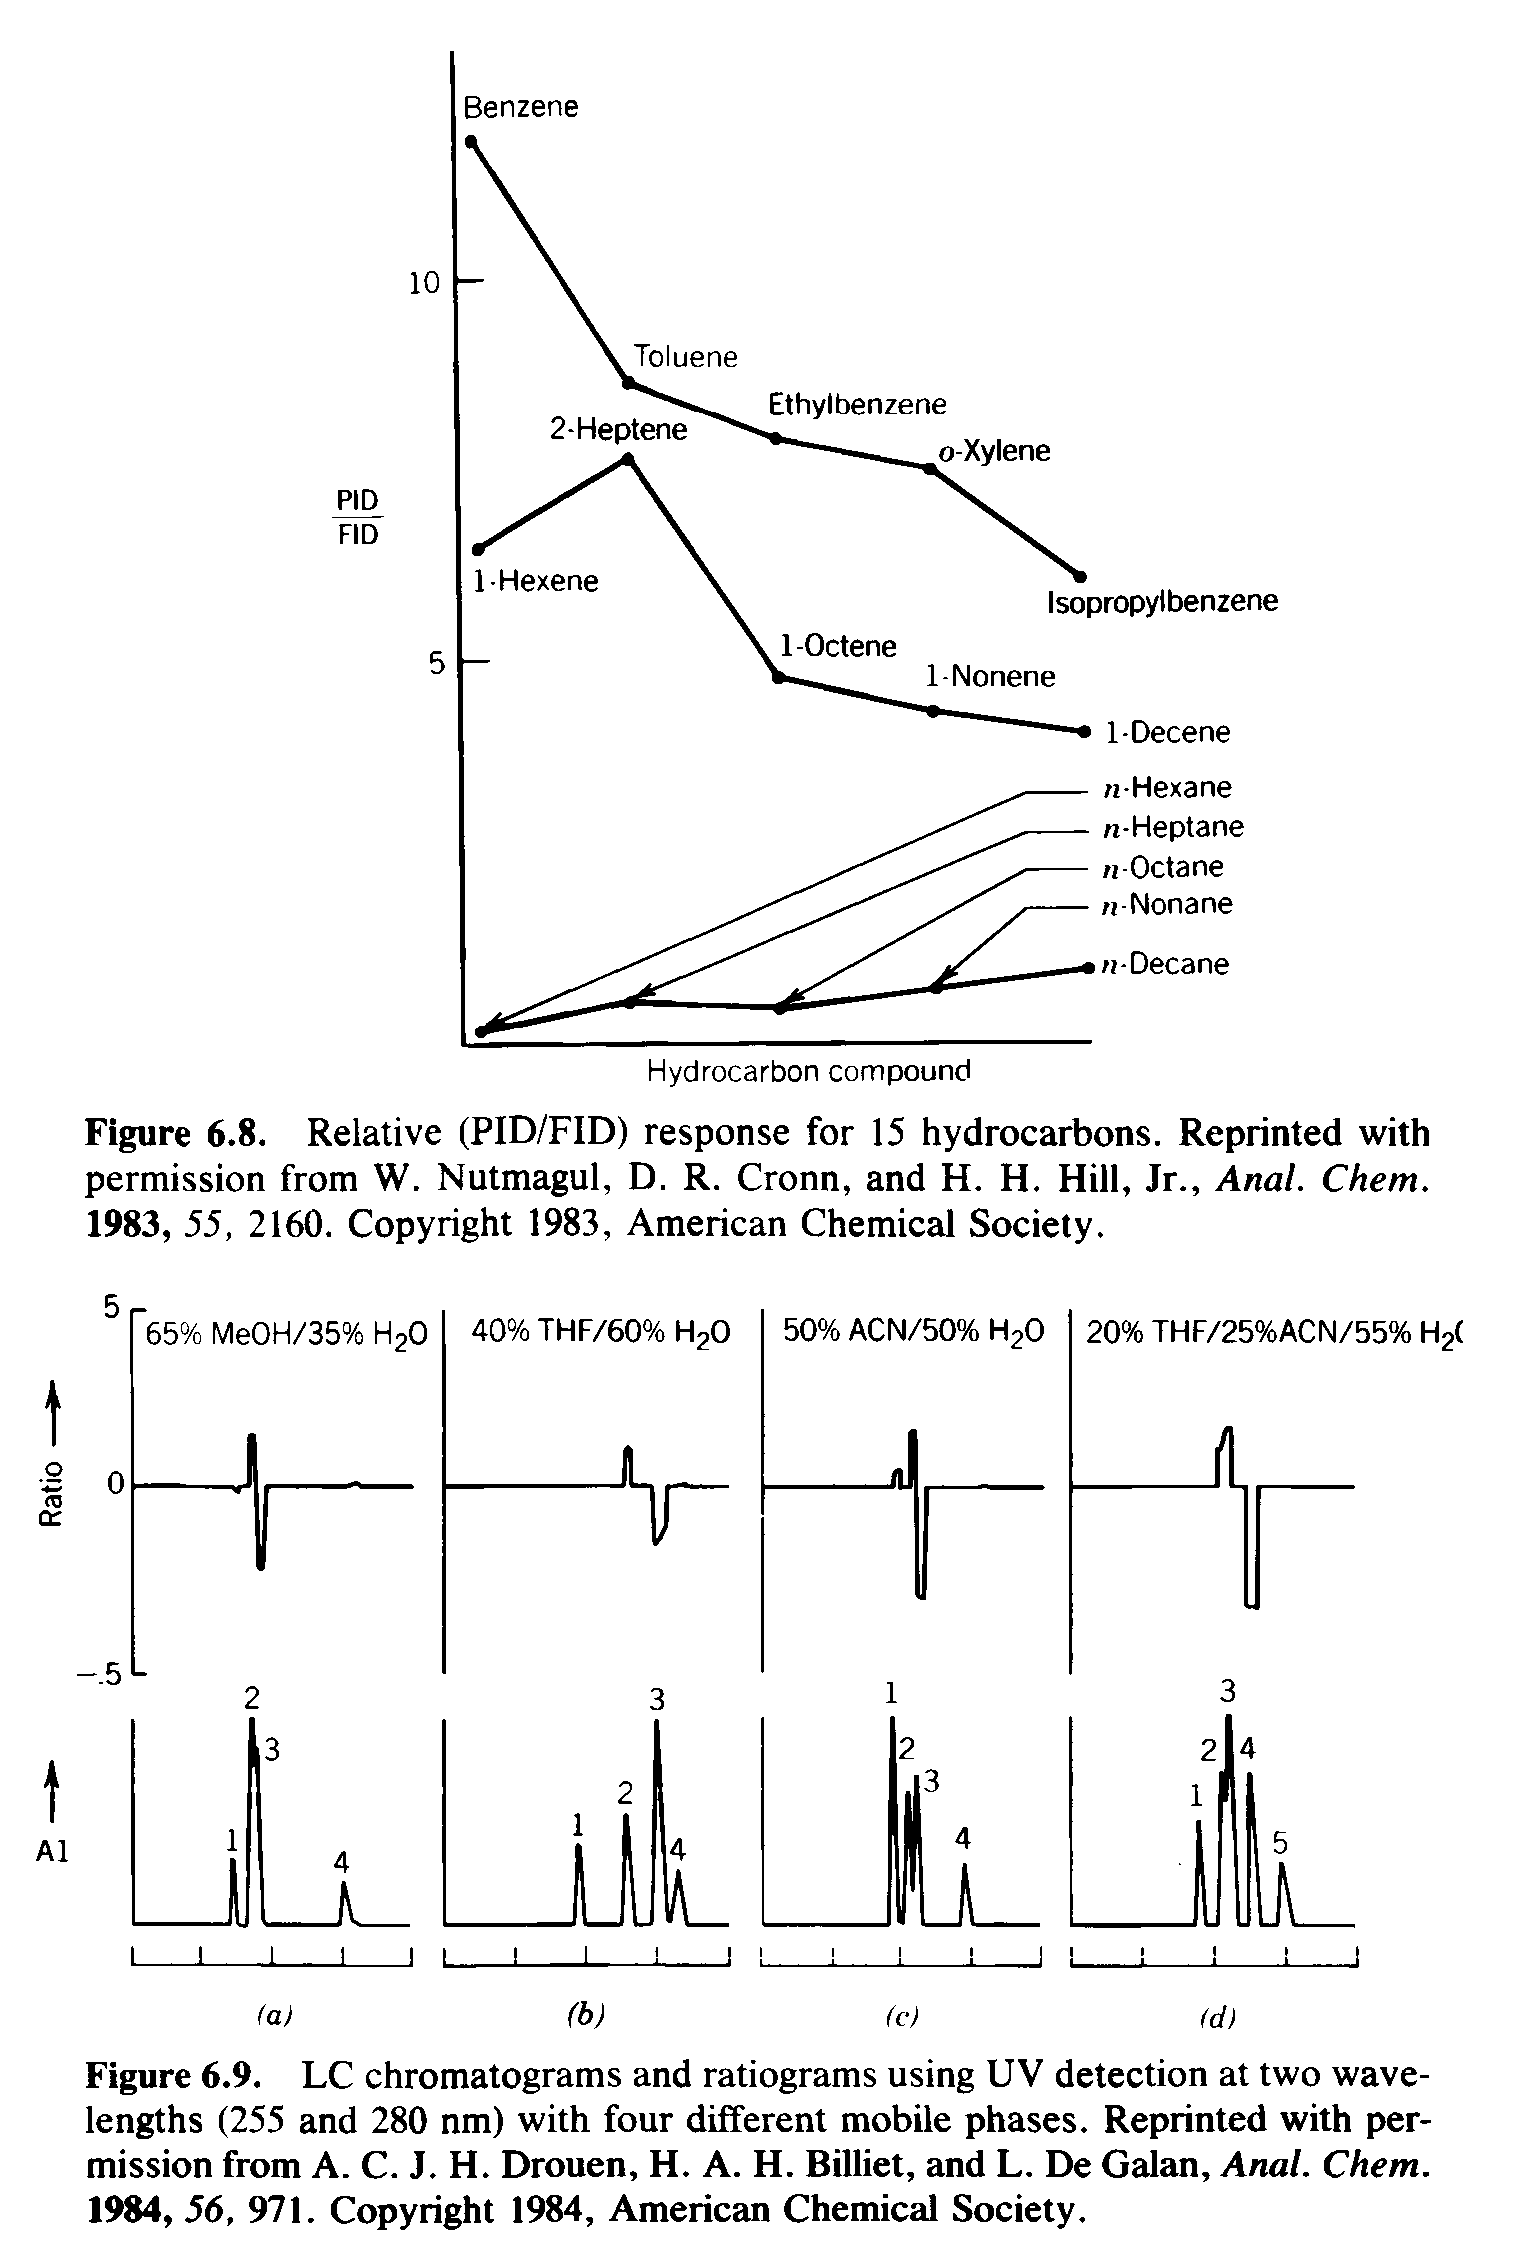 Figure 6.9. LC chromatograms and ratiograms using UV detection at two wavelengths (255 and 280 nm) with four different mobile phases. Reprinted with permission from A. C. J. H. Drouen, H. A. H. Billiet, and L. De Galan, Anal. Chem. 1984, 56, 971. Copyright 1984, American Chemical Society.